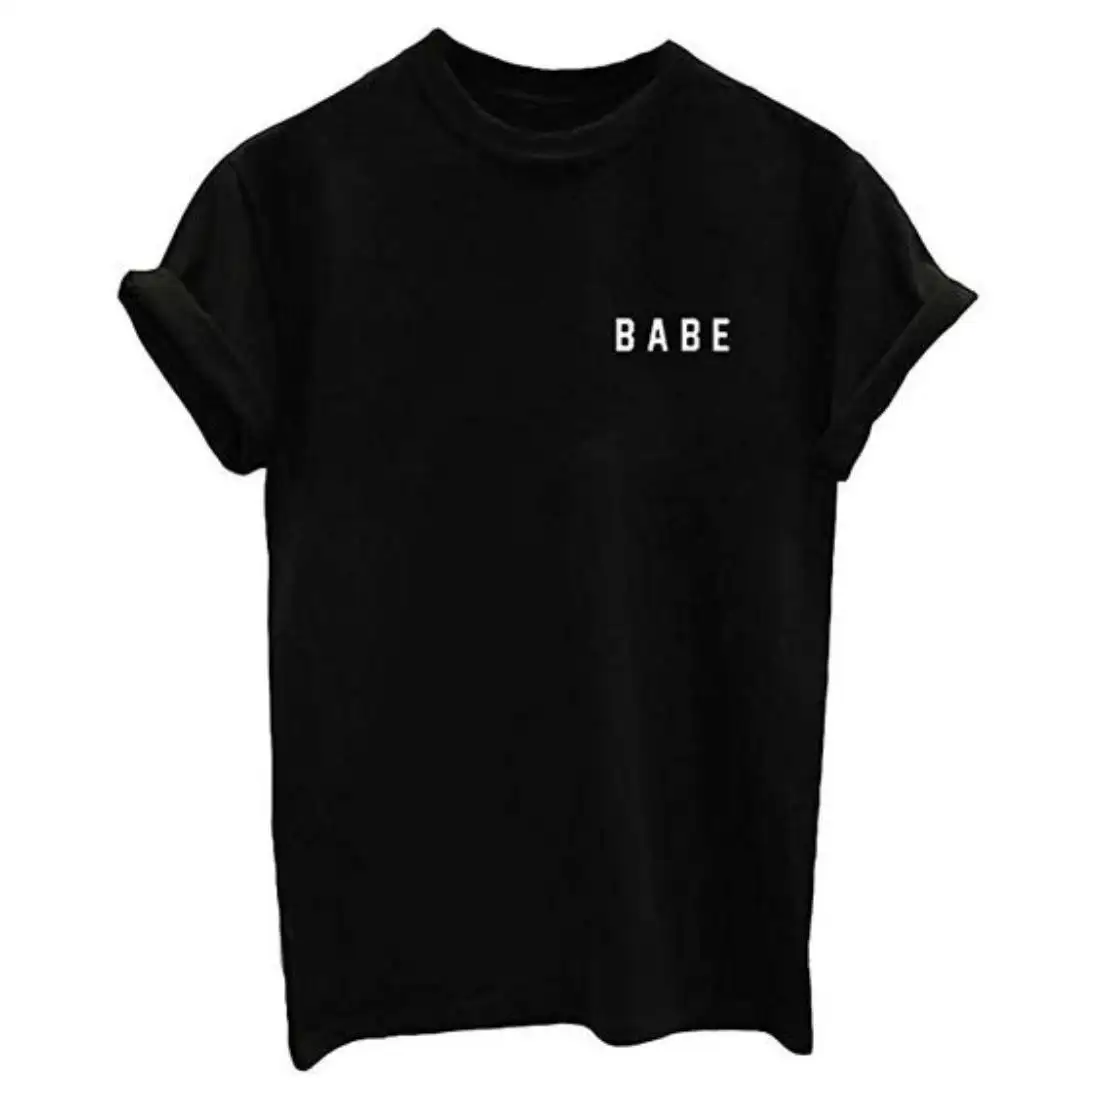 Highest Selling Standard Black T Shirt Best Suitable With Light Colored Jeans Boys or Girls Cloth Supply Accent Print T shirt